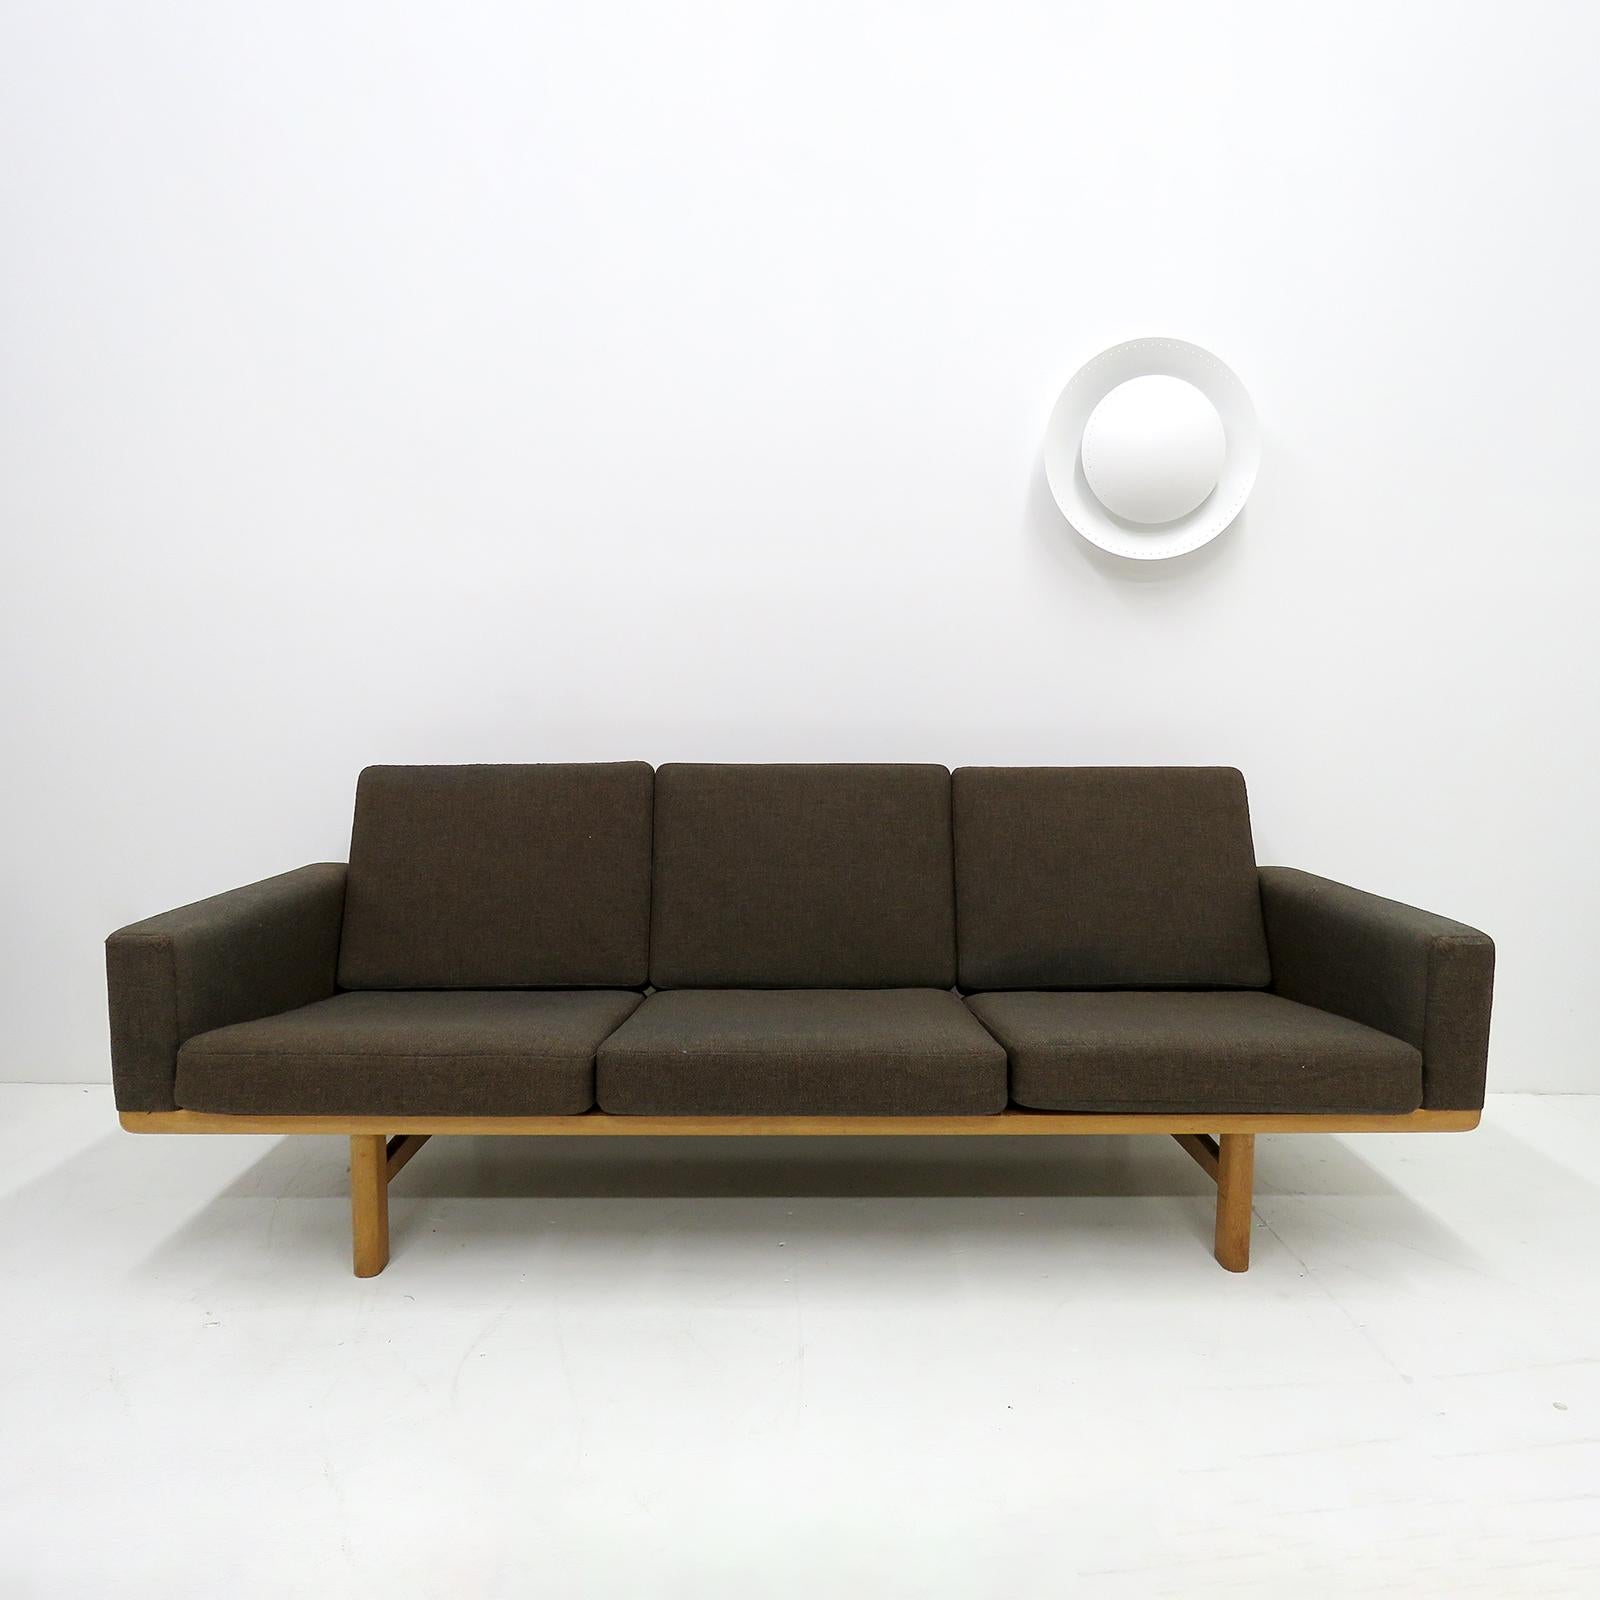 wonderful 1950s Danish three-seat sofa, model GE236/3 designed by Hans J. Wegner for GETAMA, solid oak frame with nice patina and original spring loaded cushions with grey/brown wool fabric, marked.